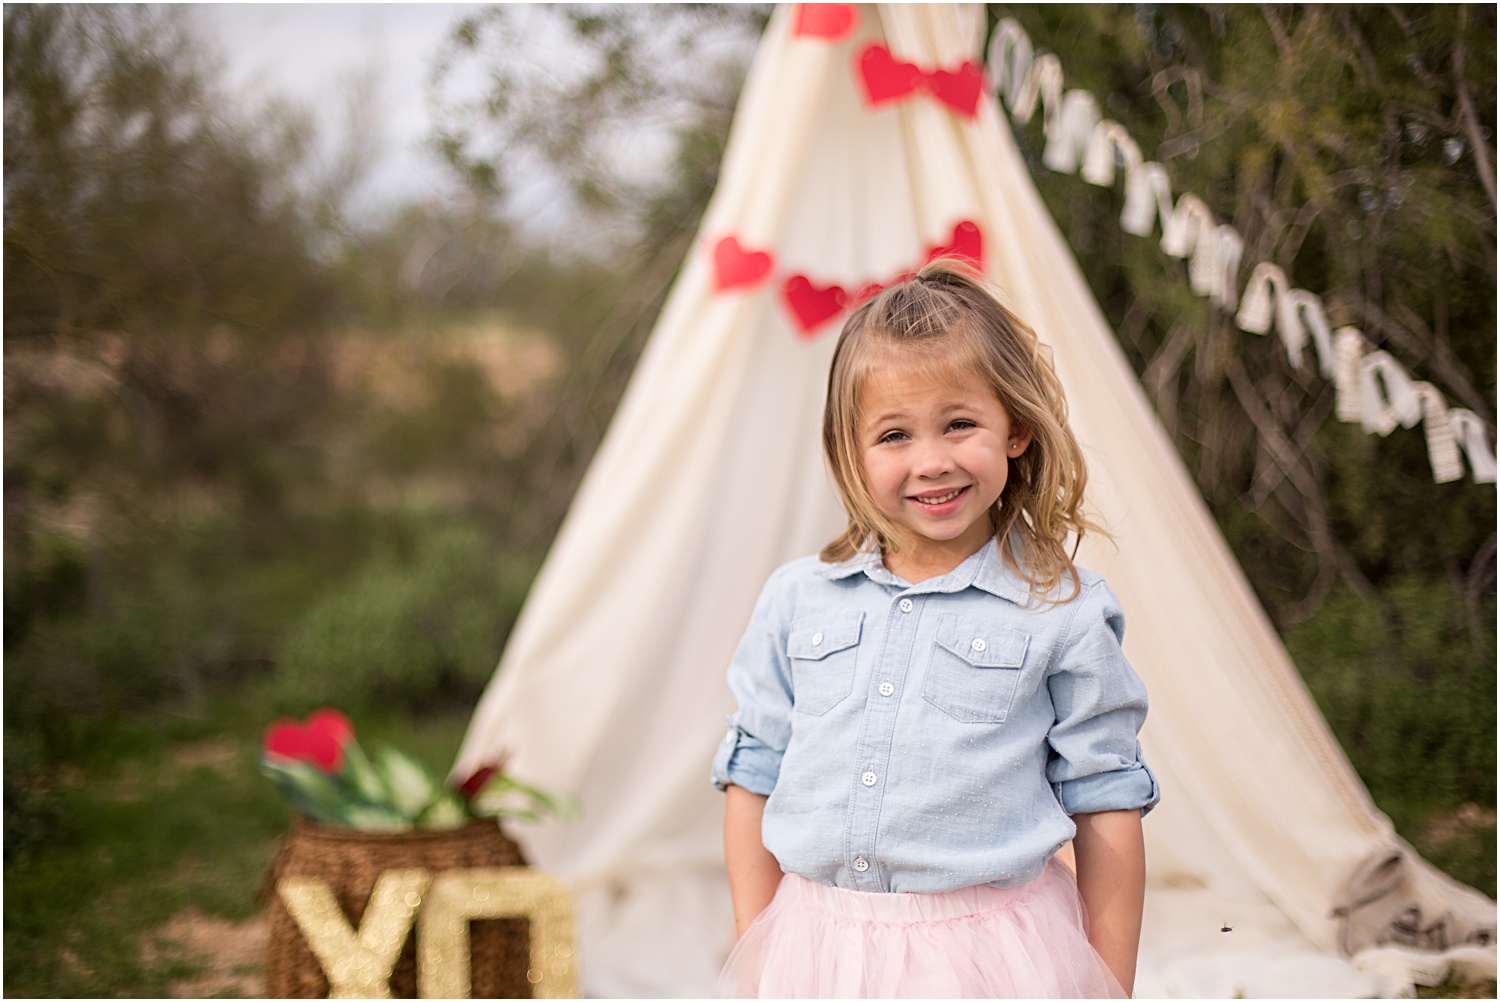 Photography by Aubrey Rae | Themed Styled Shoot - Valentine's Mini Session 